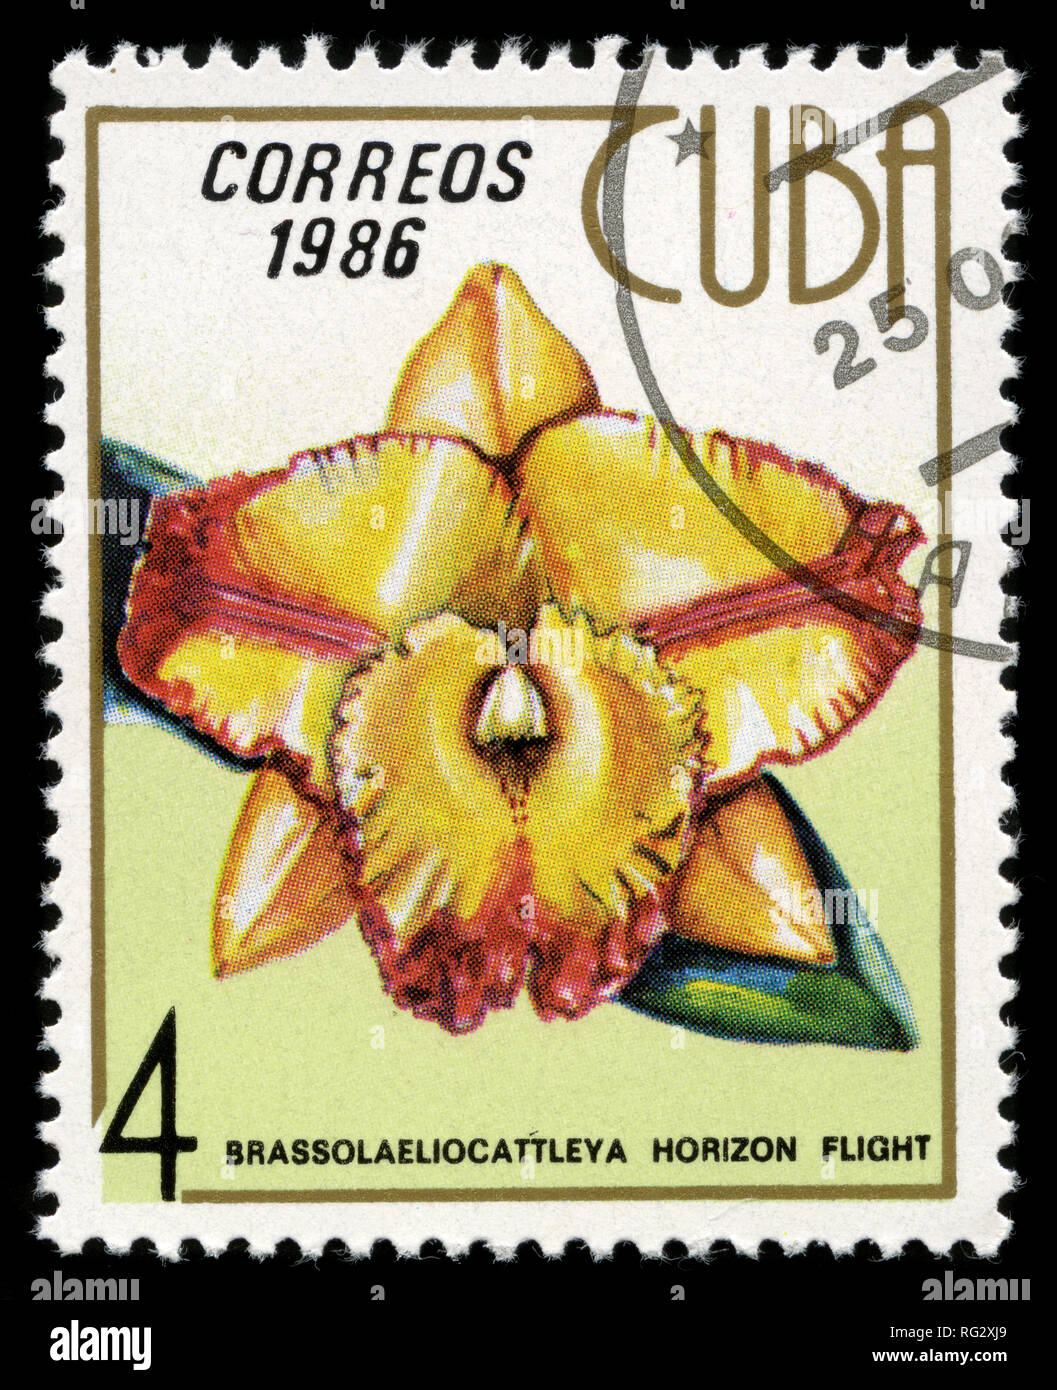 Postage stamp from Cuba in the Orchids series issued in 1986 Stock Photo